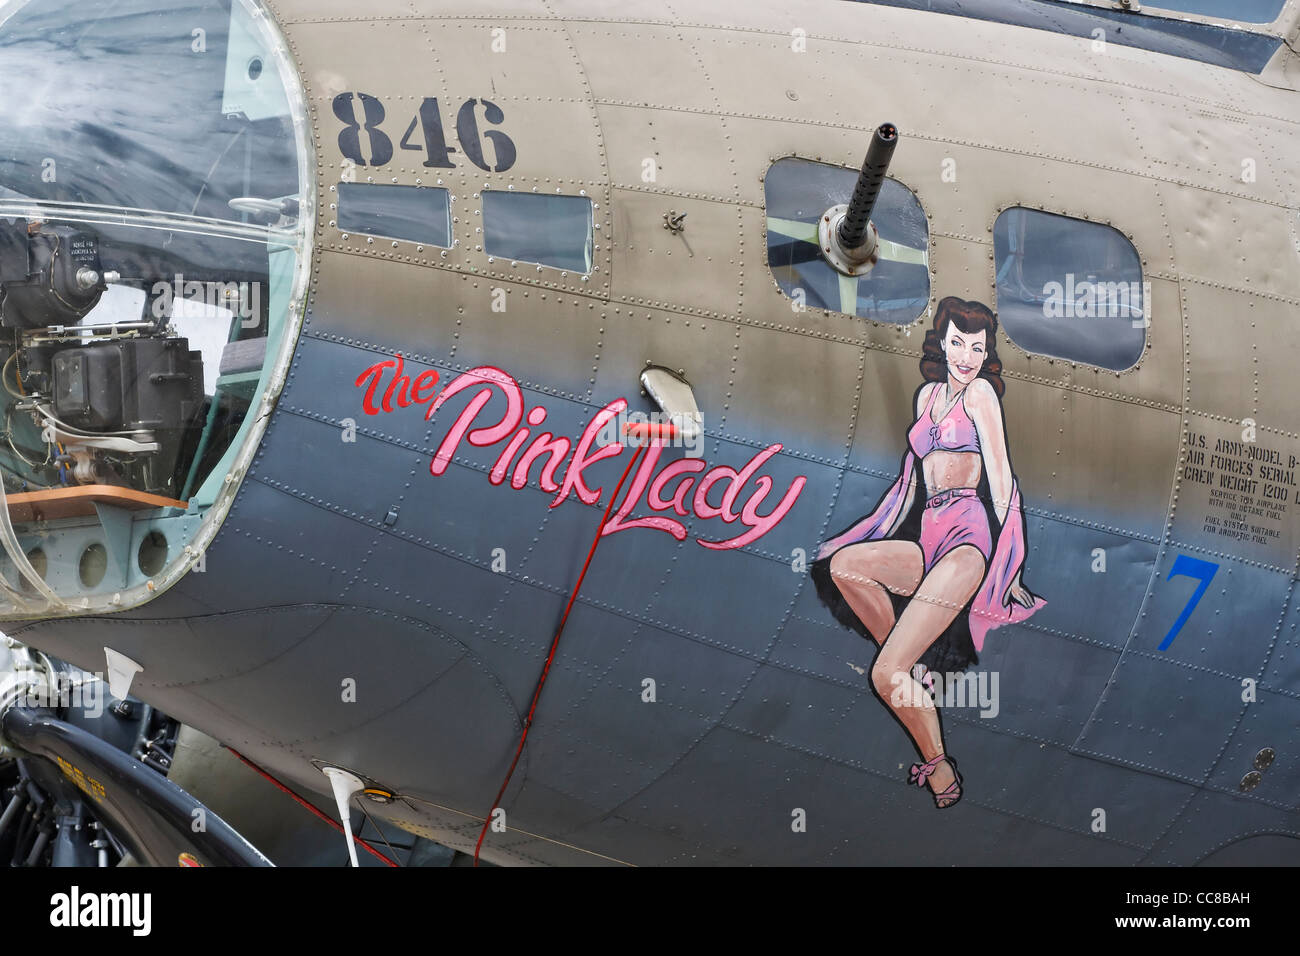 Boeing B17 Flying Fortress - Nose Art Stock Photo